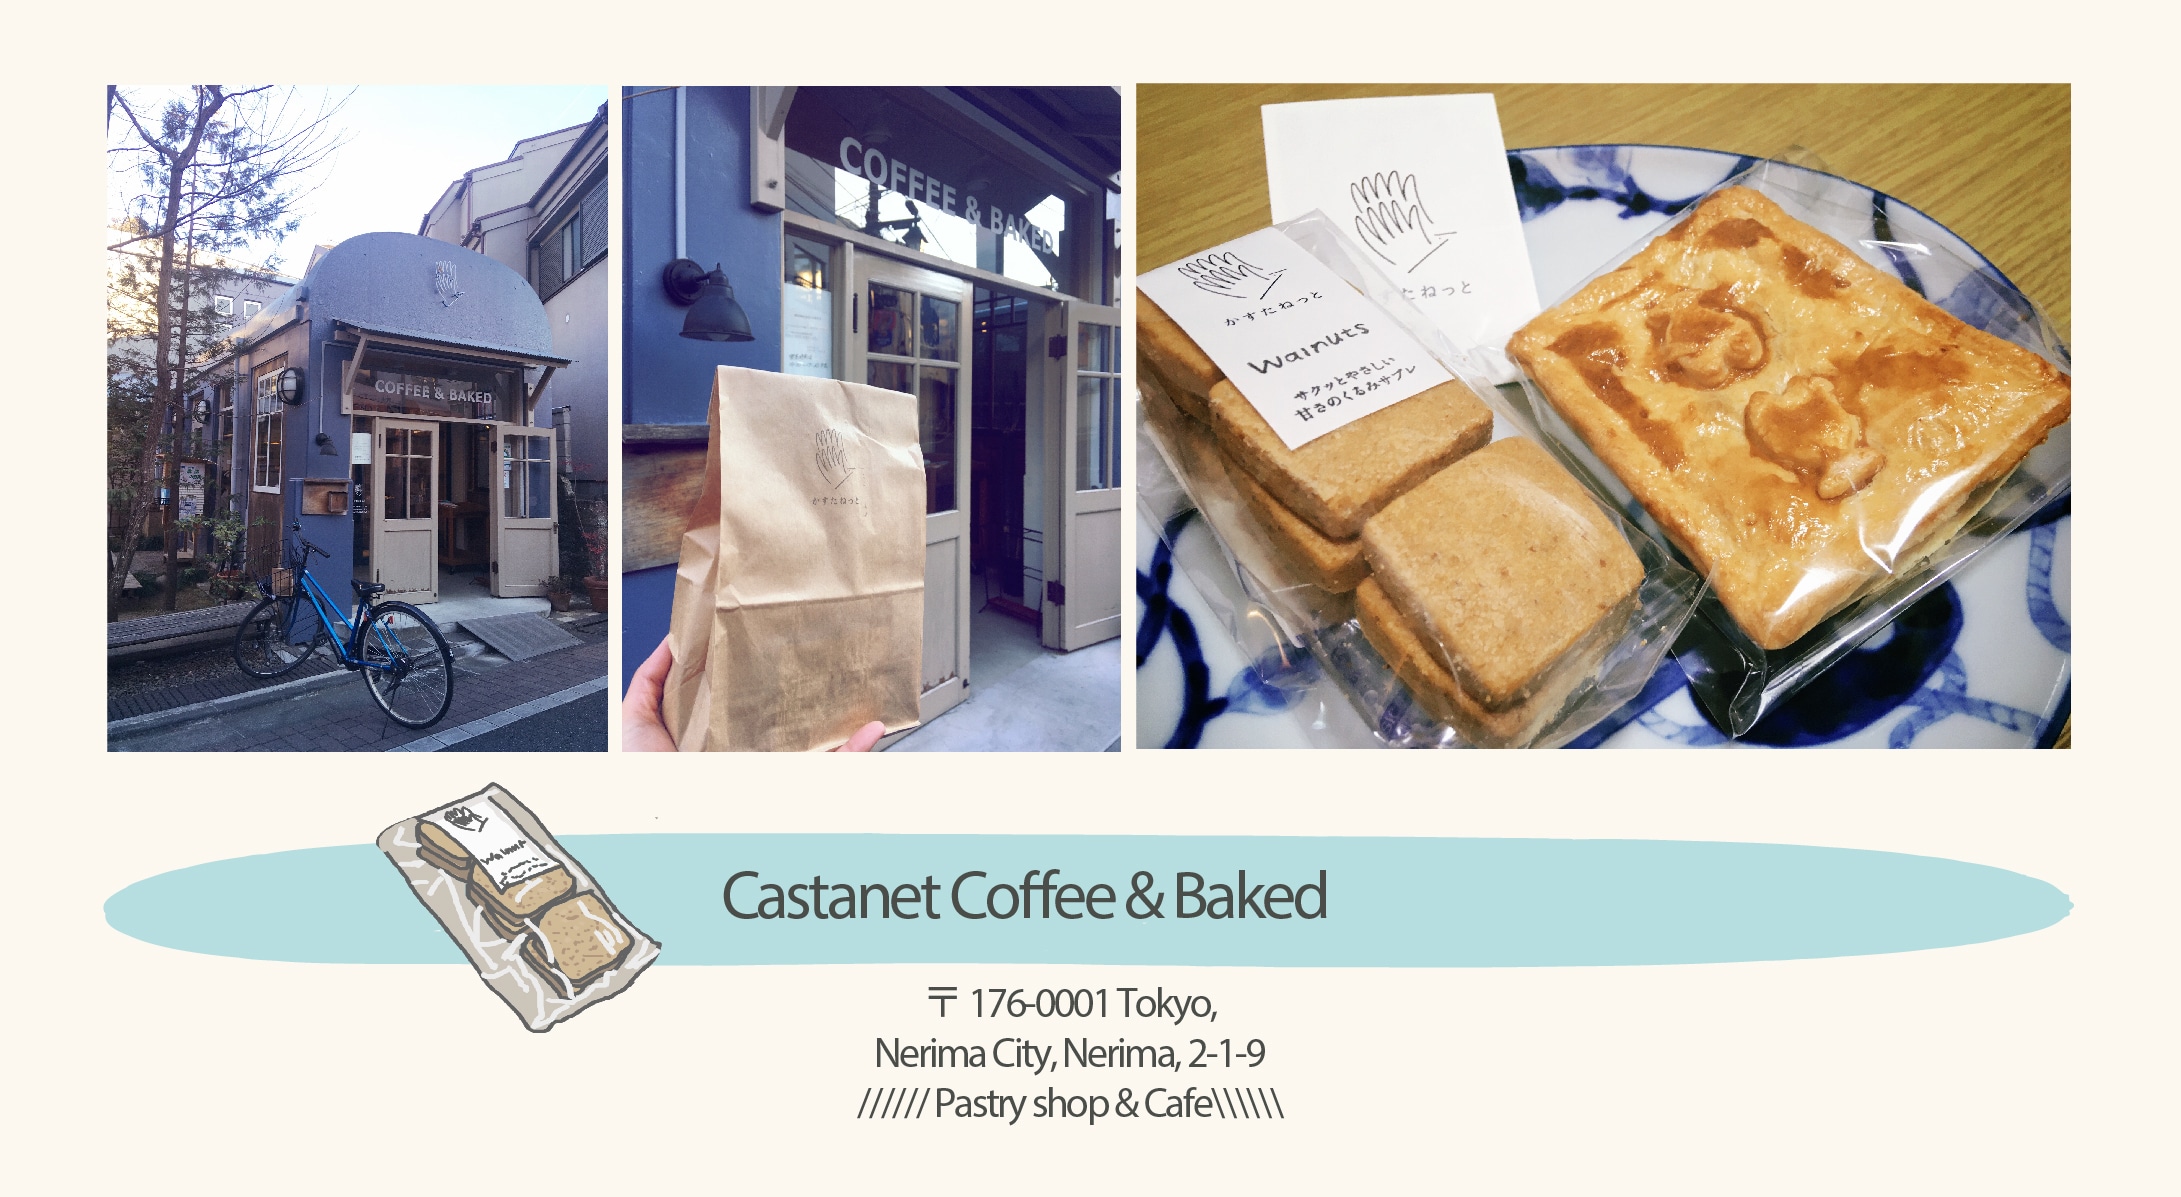 Castanet Coffee and Baked